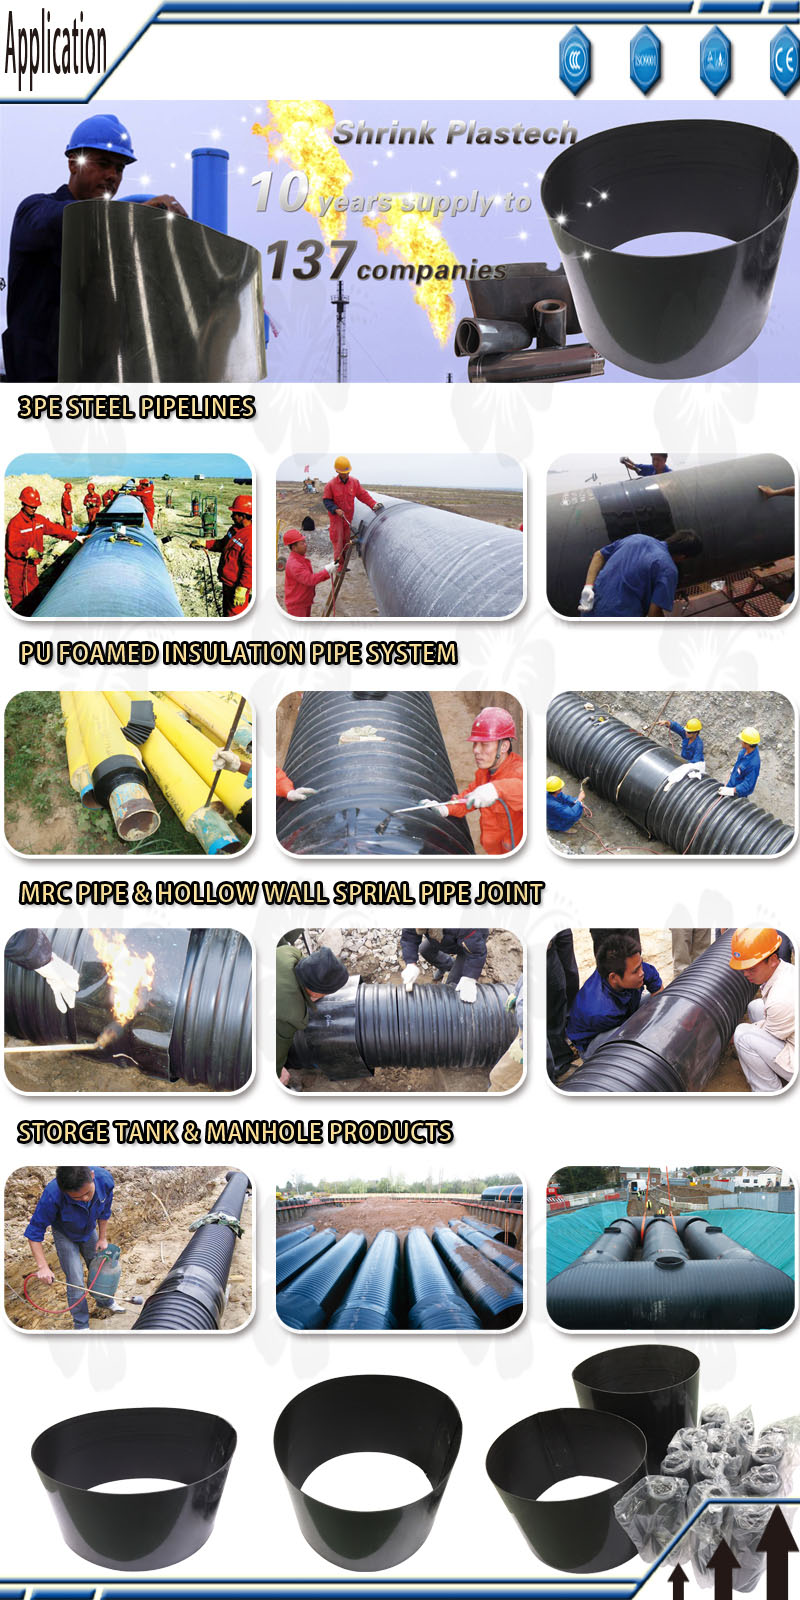 Pipe joint application